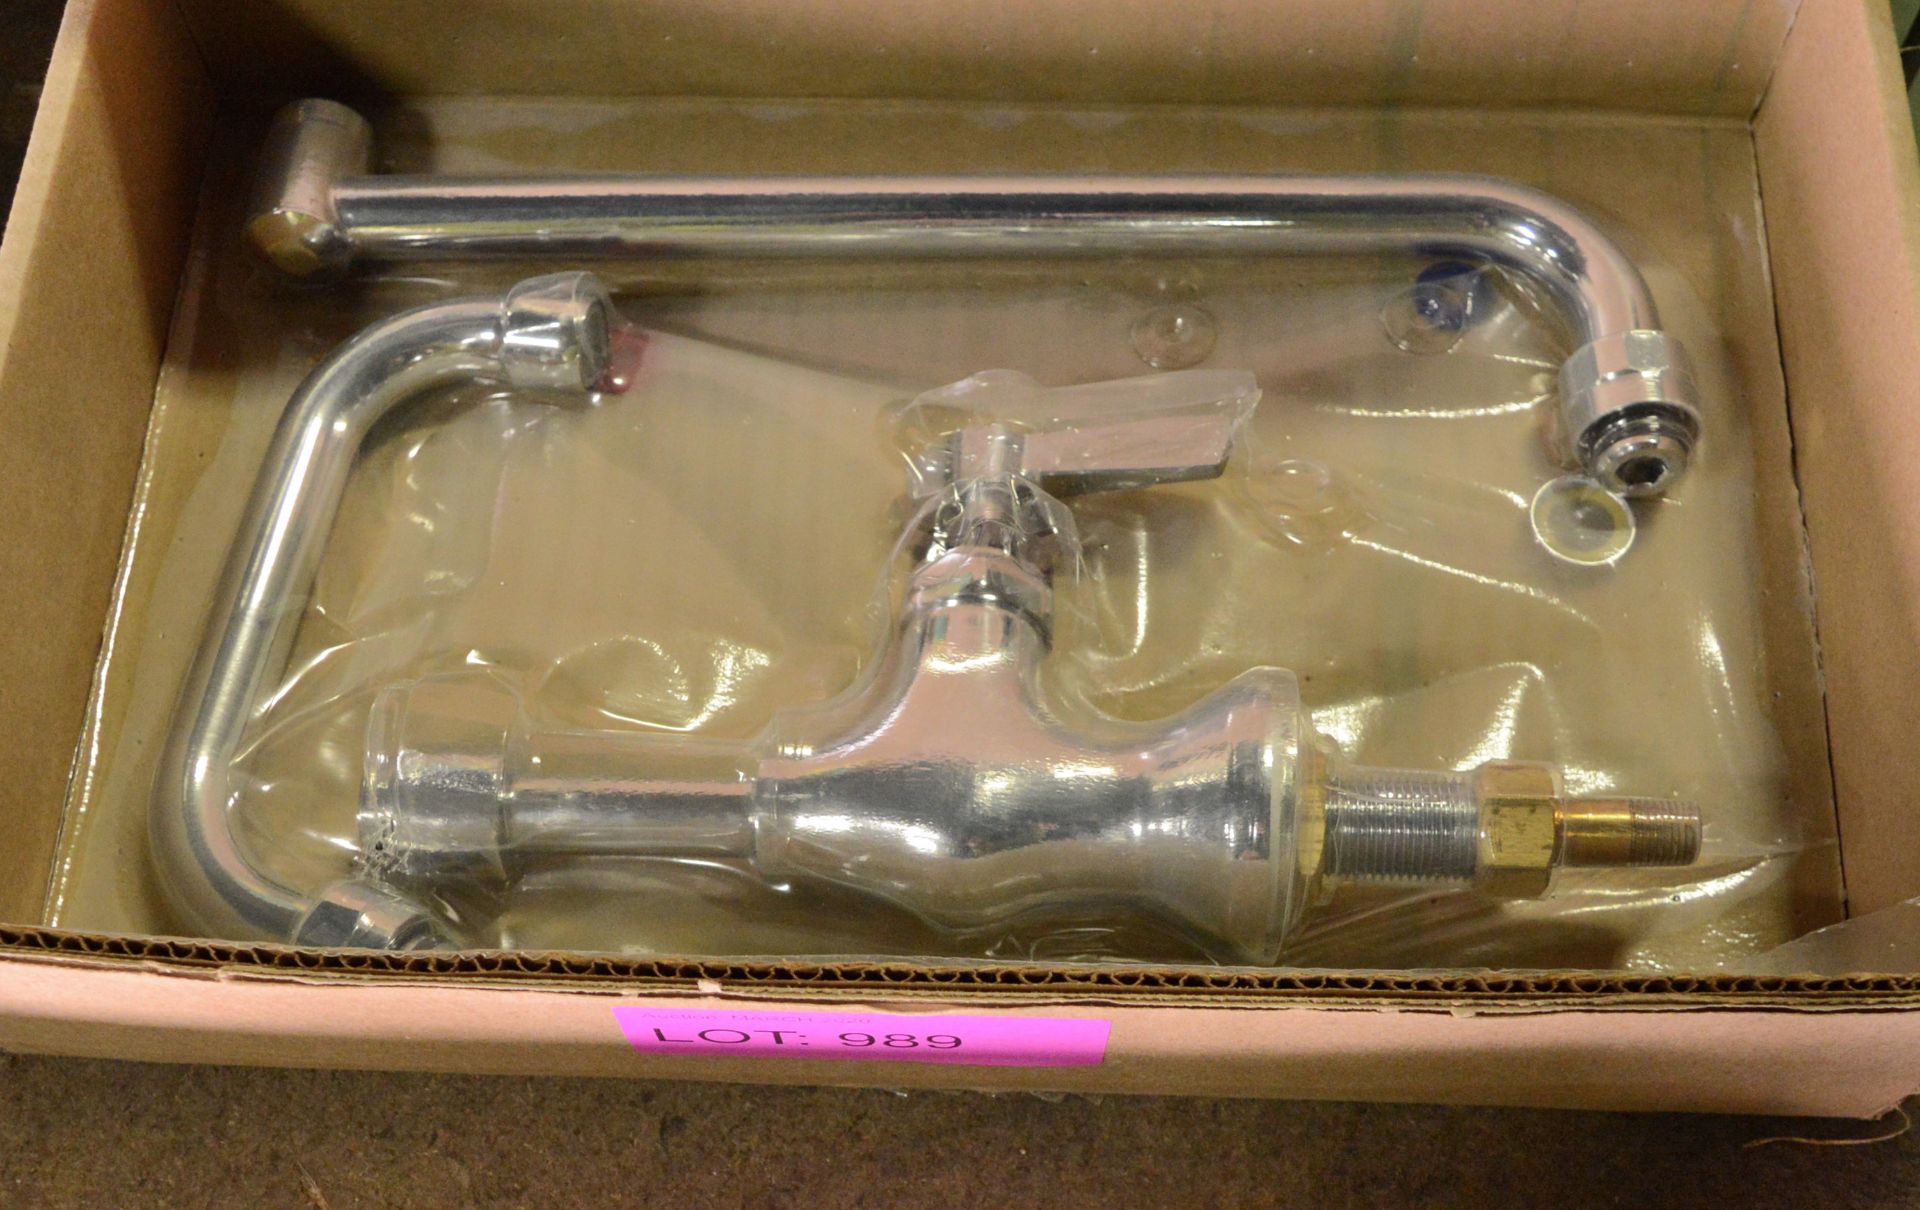 Woodrow Vulcan KN65-9018-SP1 Single Cold Faucet.